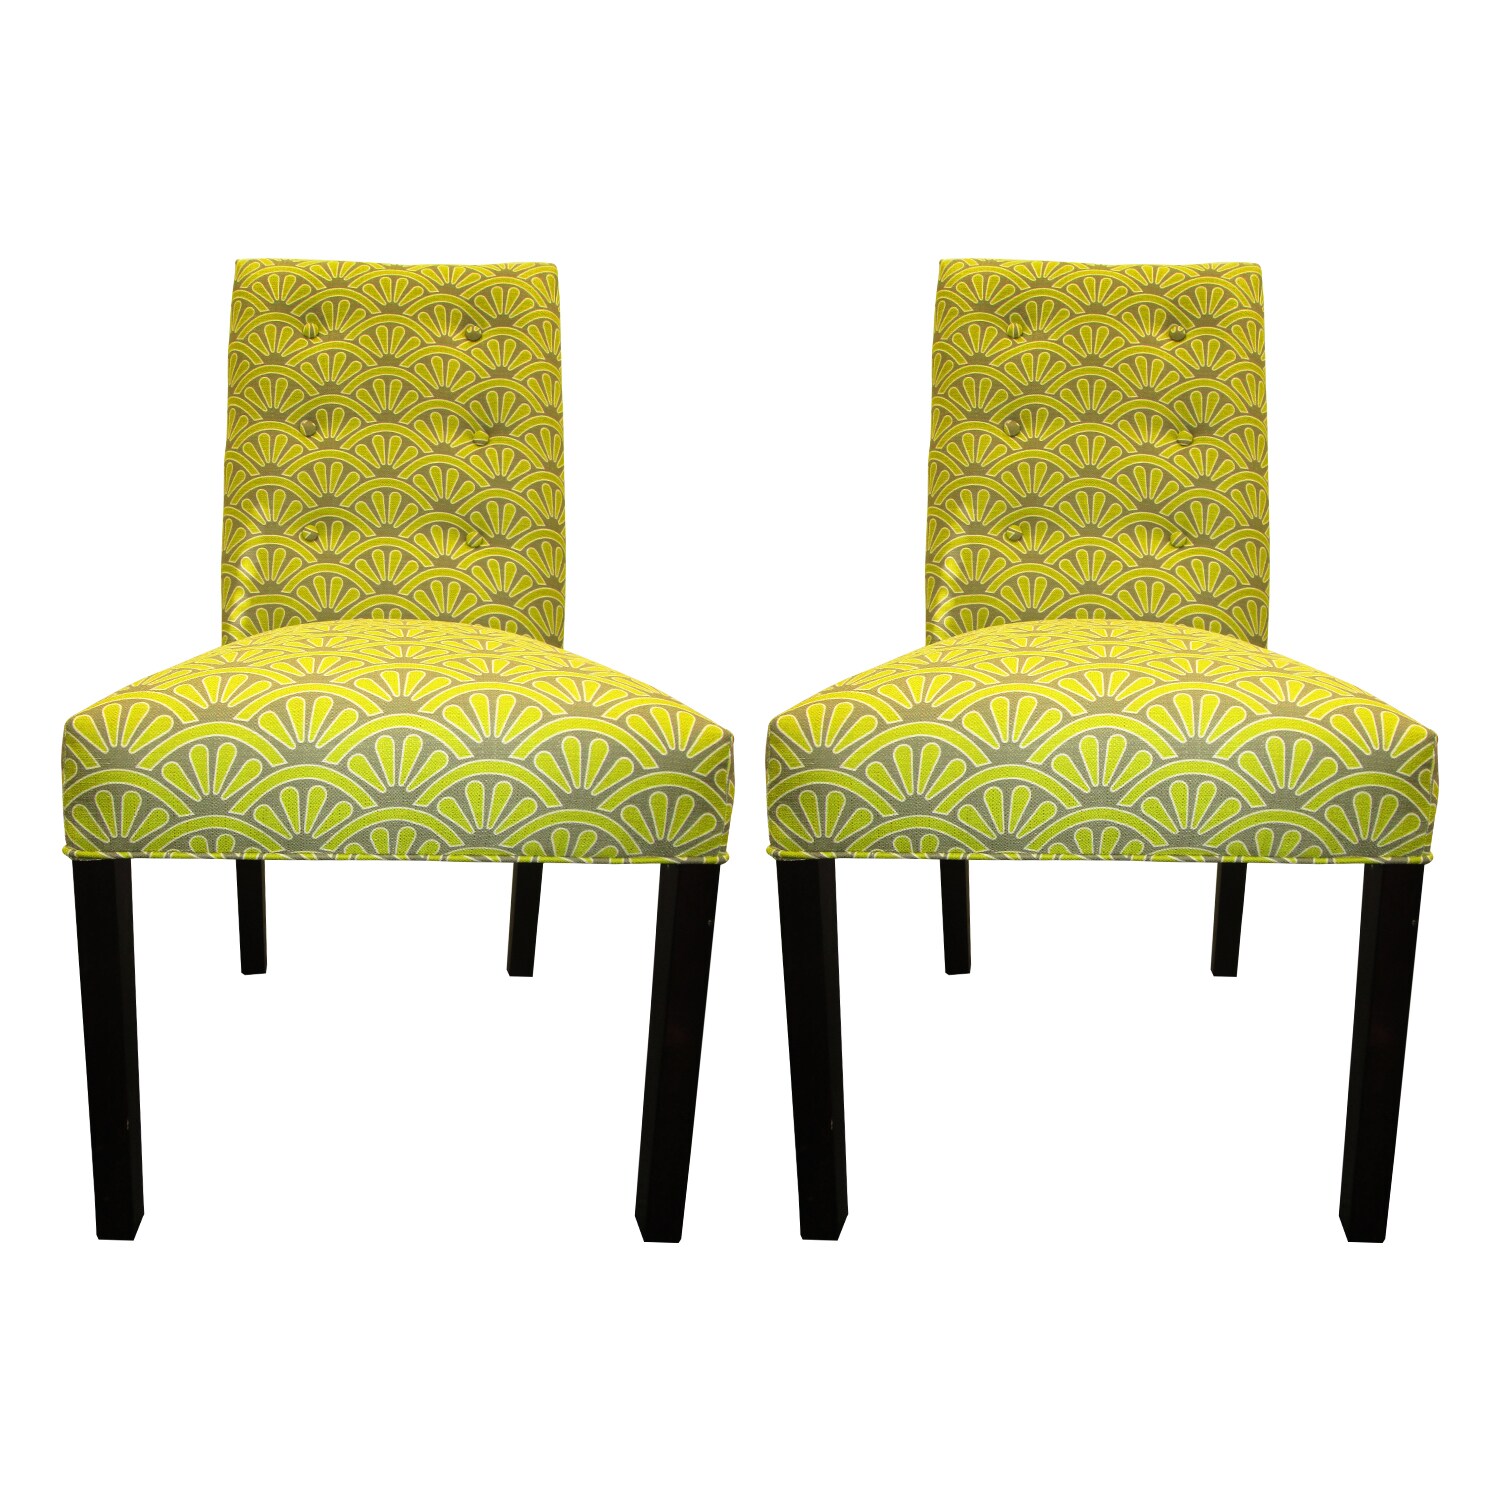 Sole Designs Bonjour 6 button Tufted Dining Chairs (set Of 2)